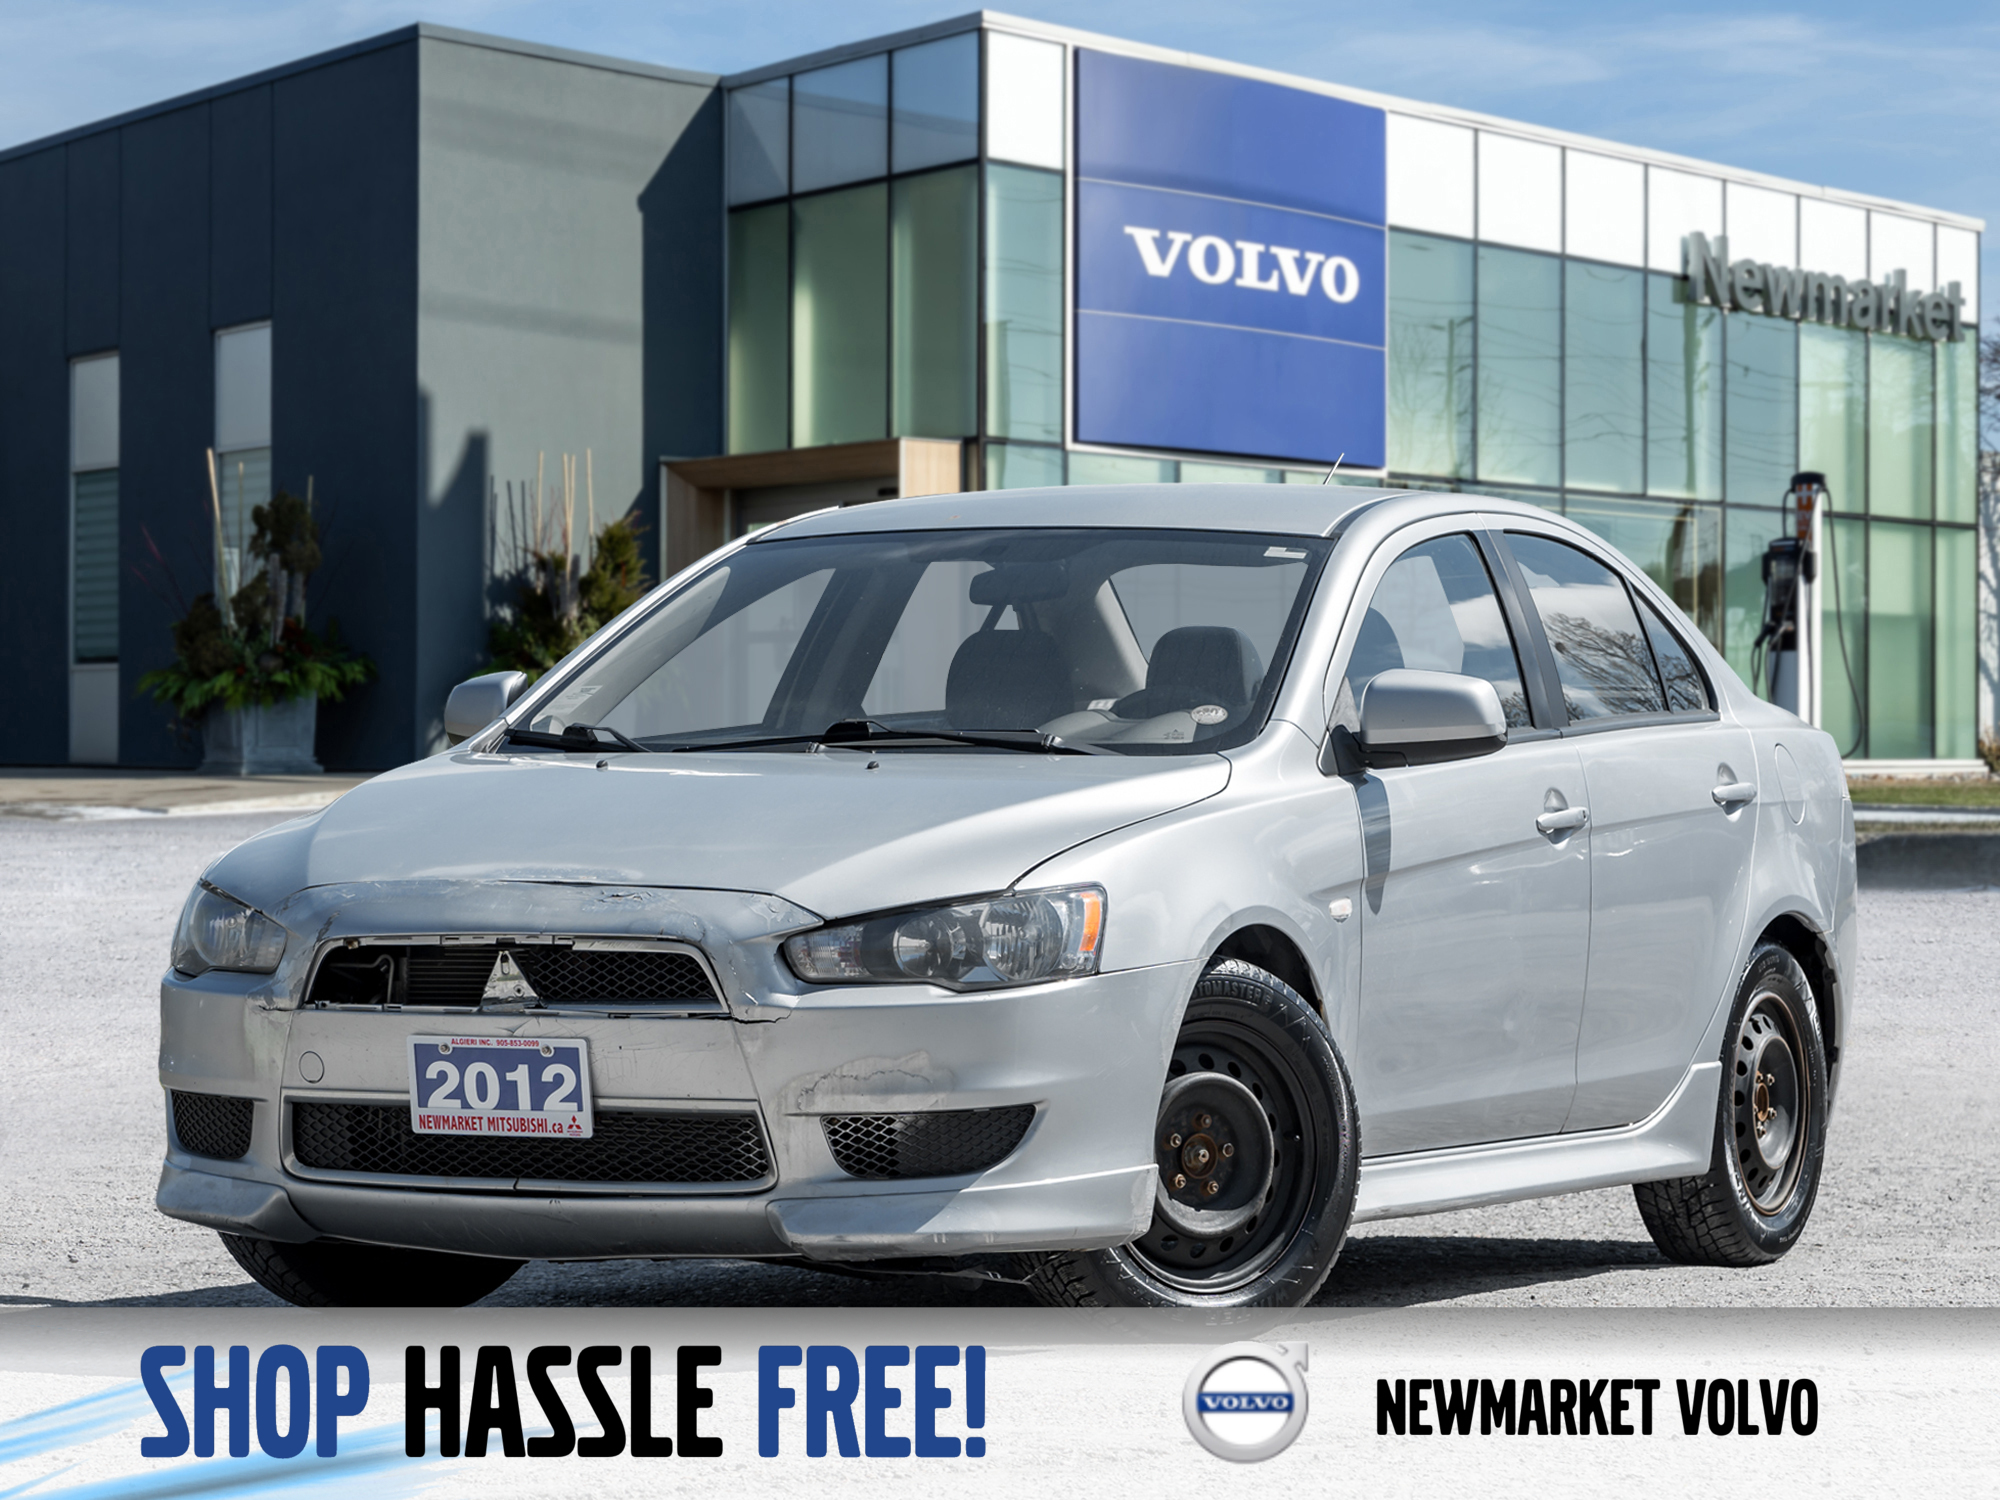 2012 Mitsubishi Lancer 4dr Sdn CVT SE FWD |AS TRADED |AS IS